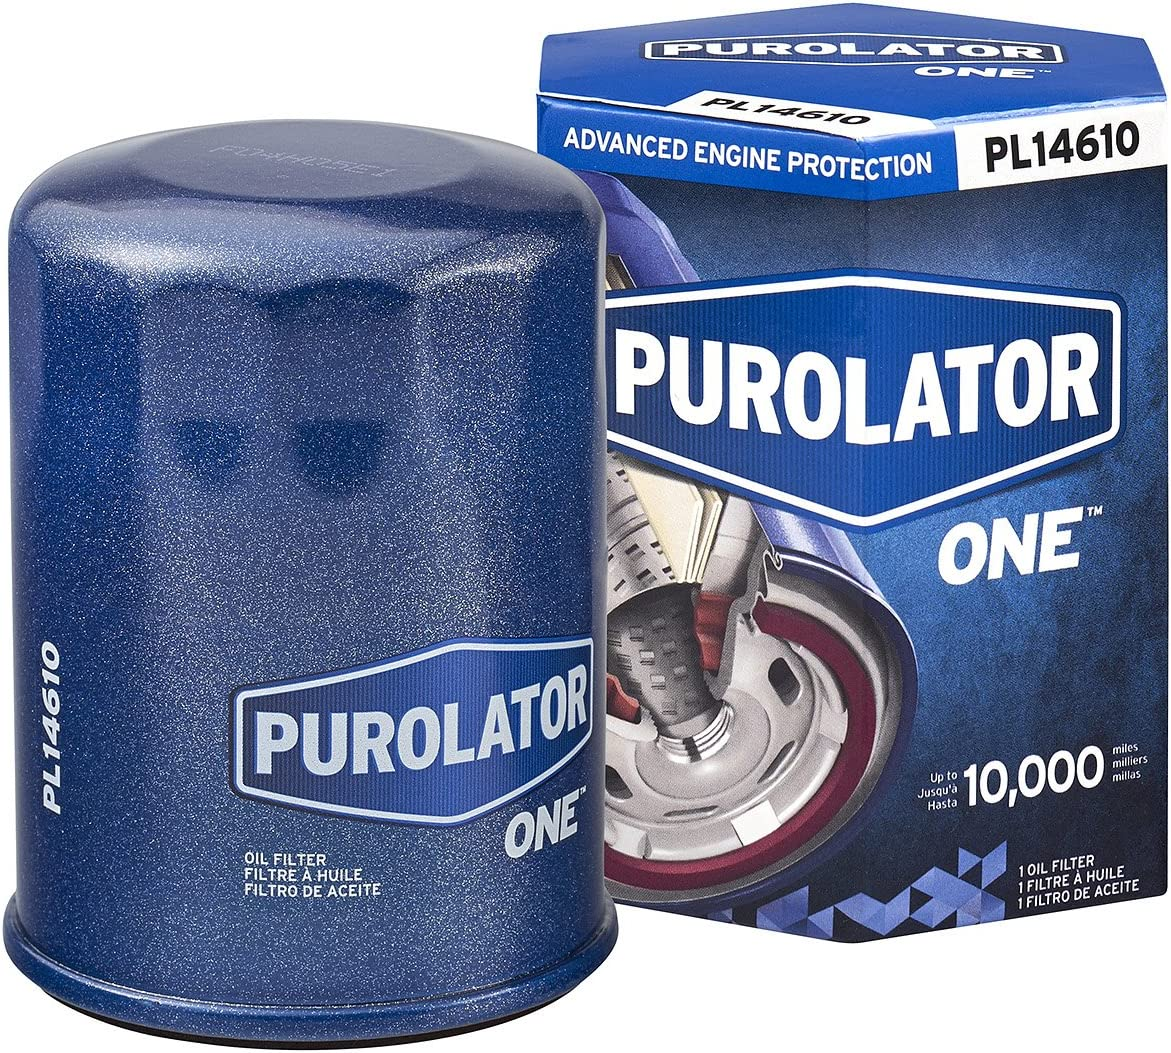 Amazon.com: PurolatorONE oil filter 12 pack ‎PL14610 $25.30 some Honda and other makes at Amazon